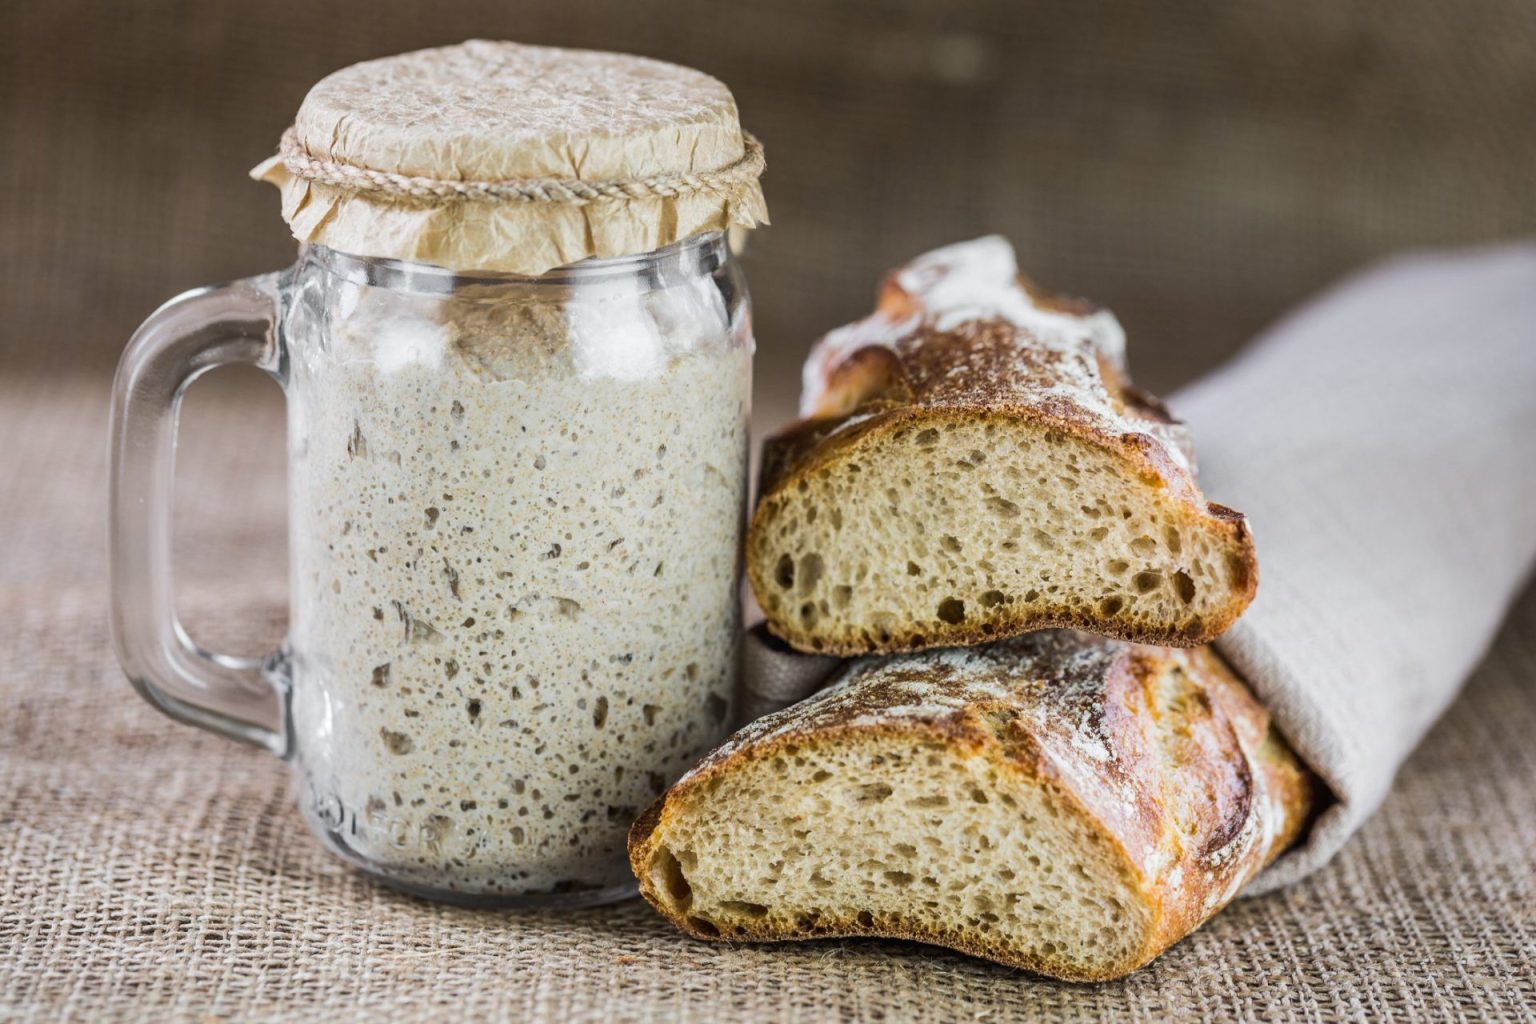 You Can Bake Your Own Delicious Crusty Bread